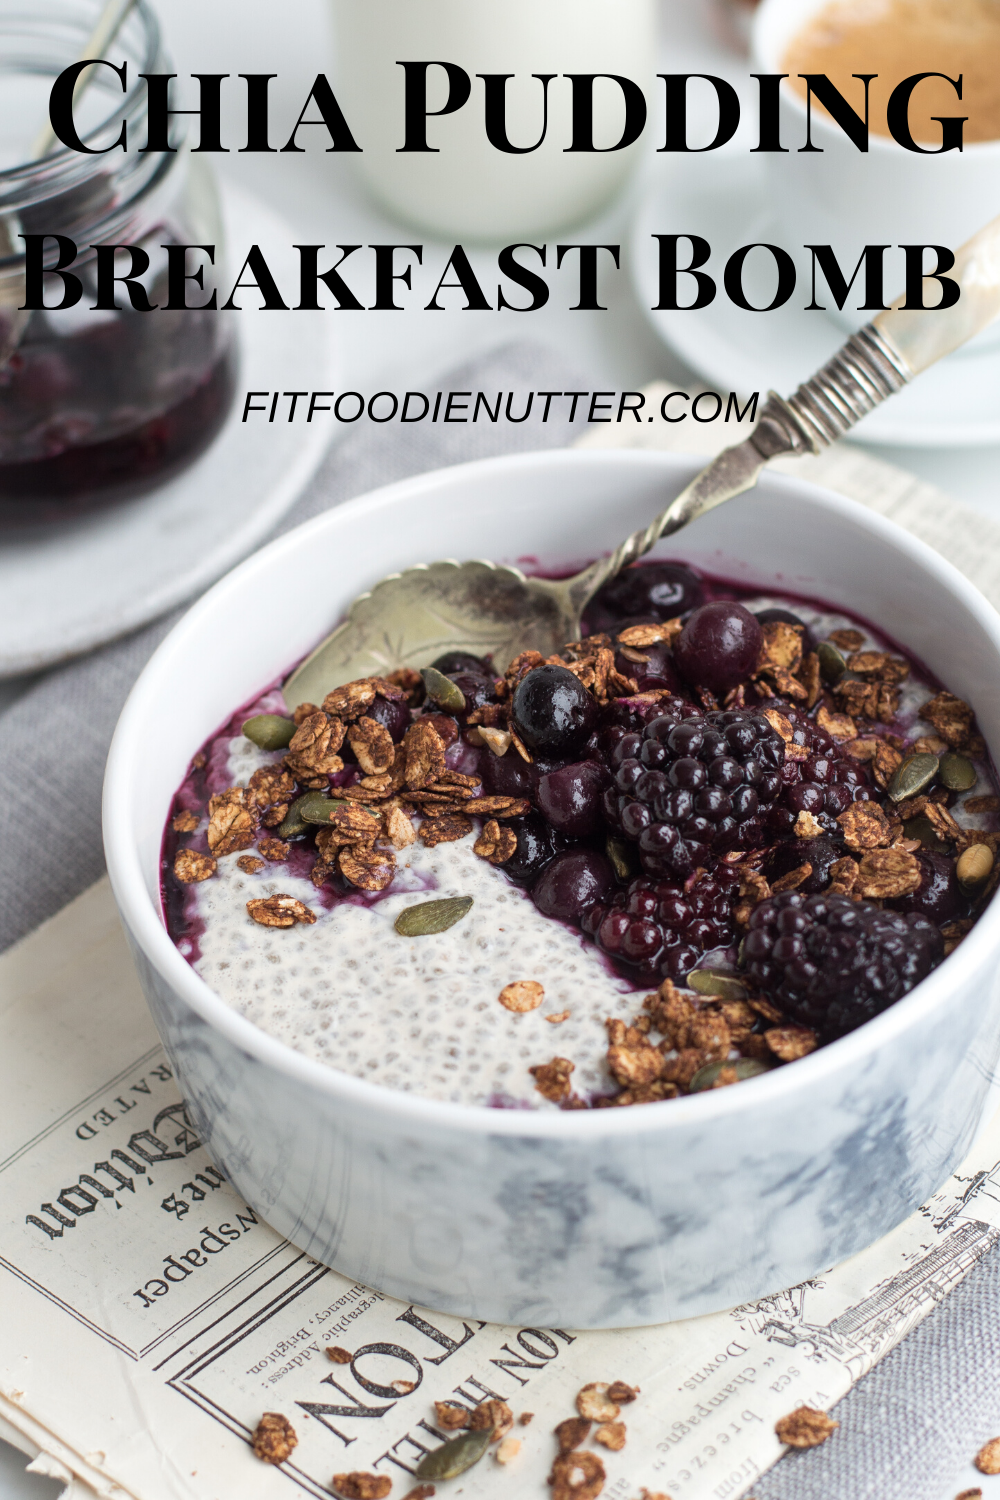 Chia pudding, berry compote & chocolate granola in a bowl